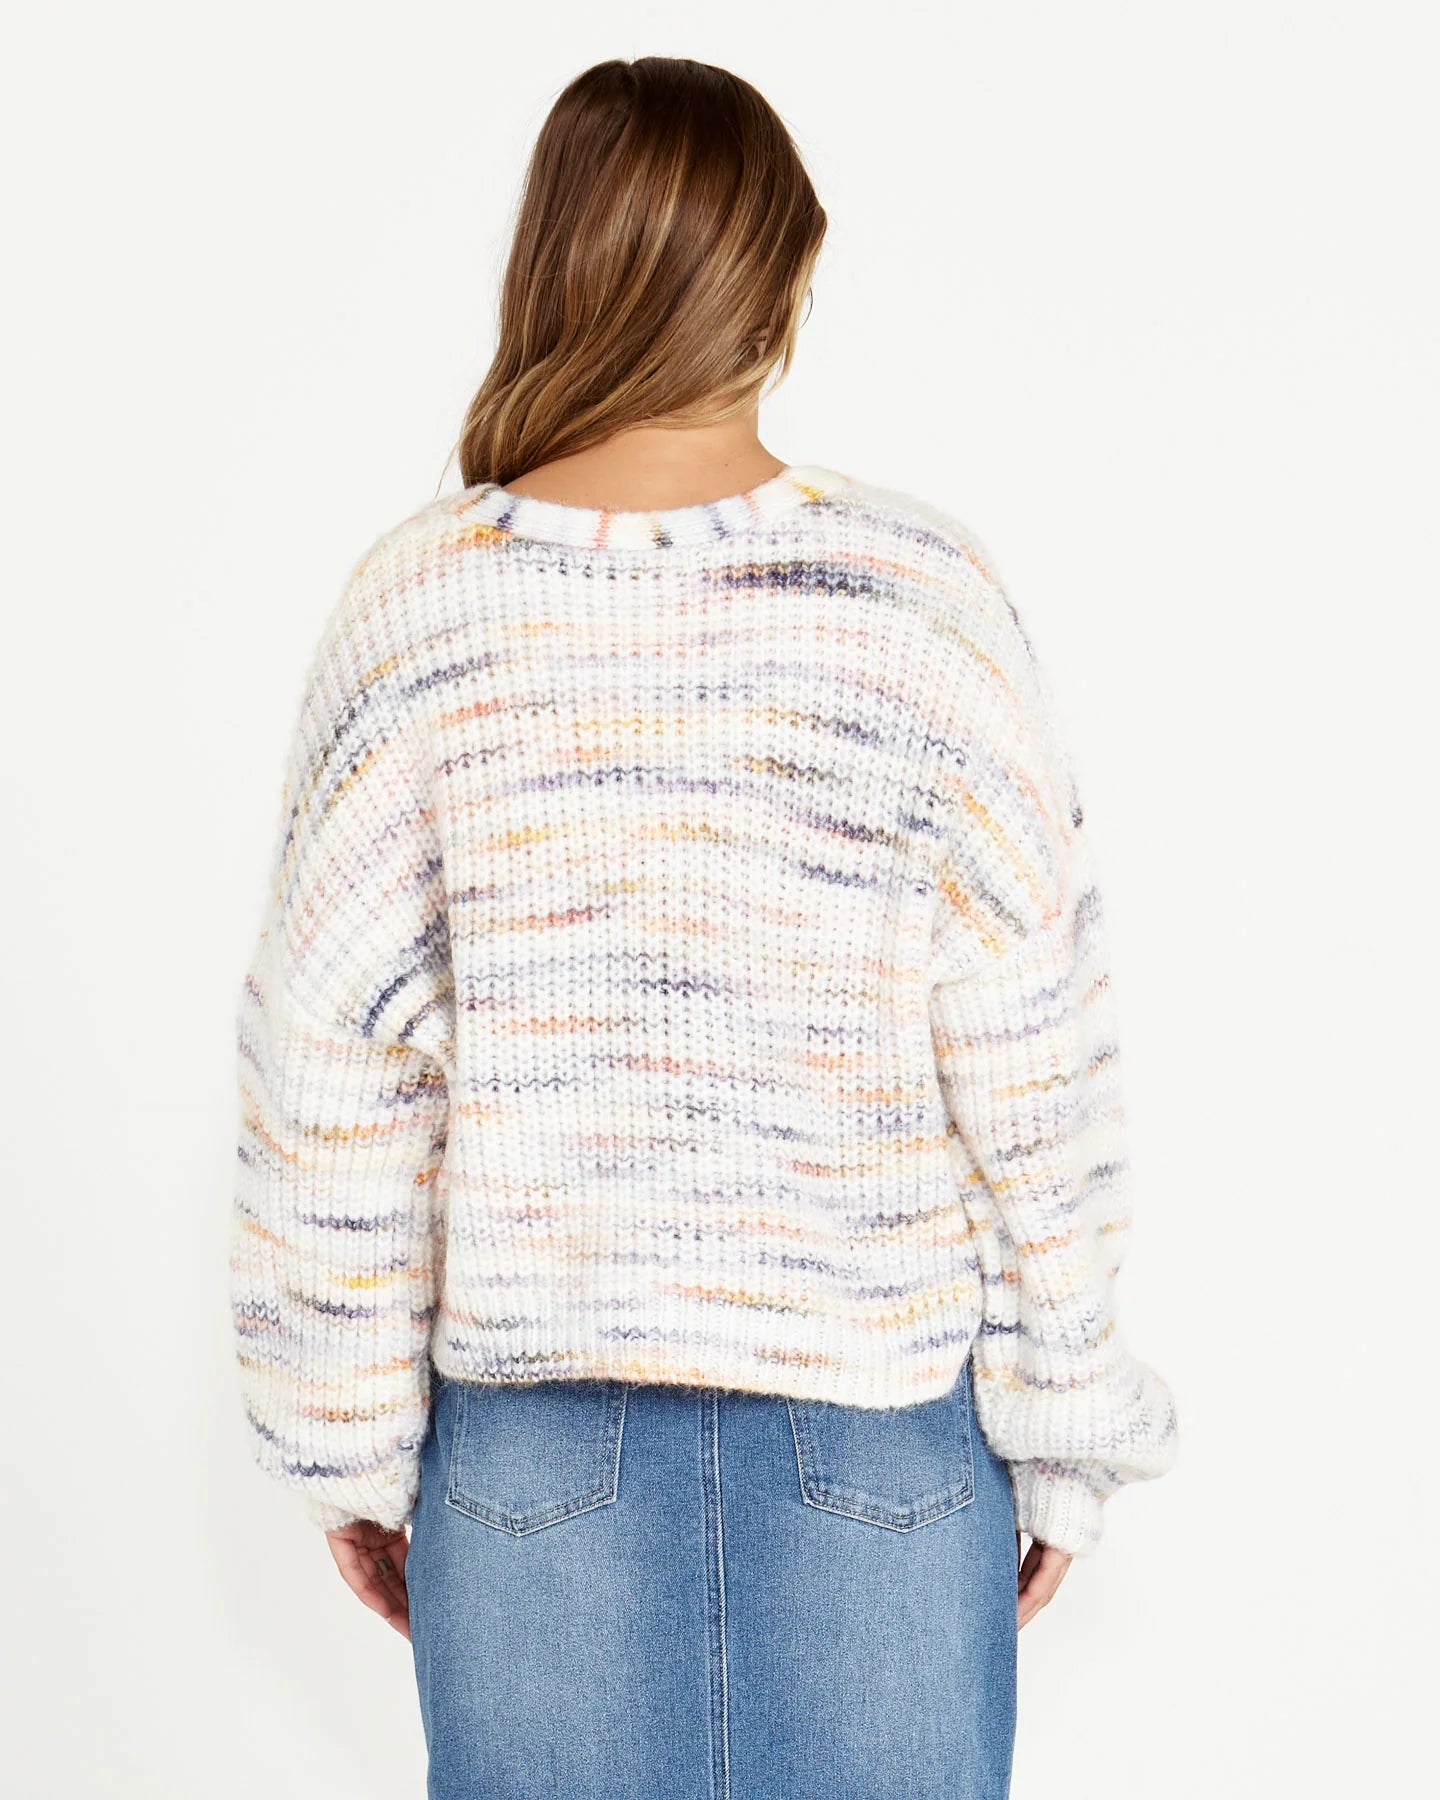 Sass - Pepper Space Oversized Button Up Wool-Blend Cardi - Cream Rainbow Marle